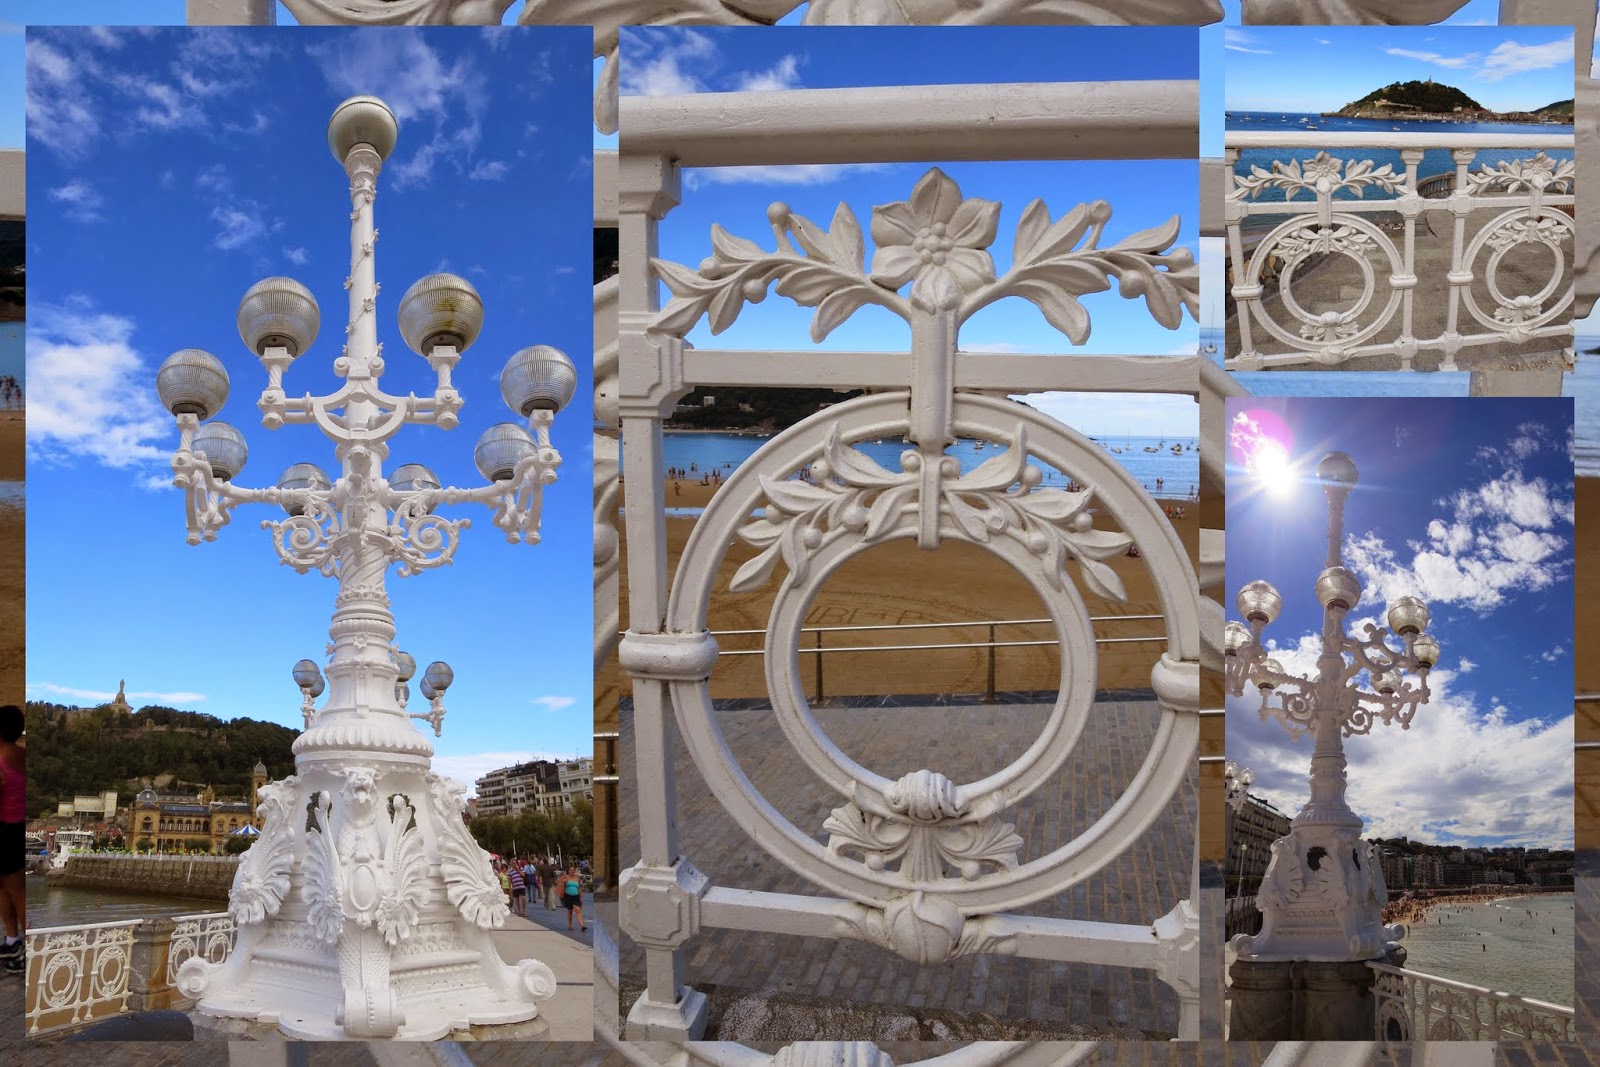 What to see in San Sebastián: Seaside Promenade with white lampposts